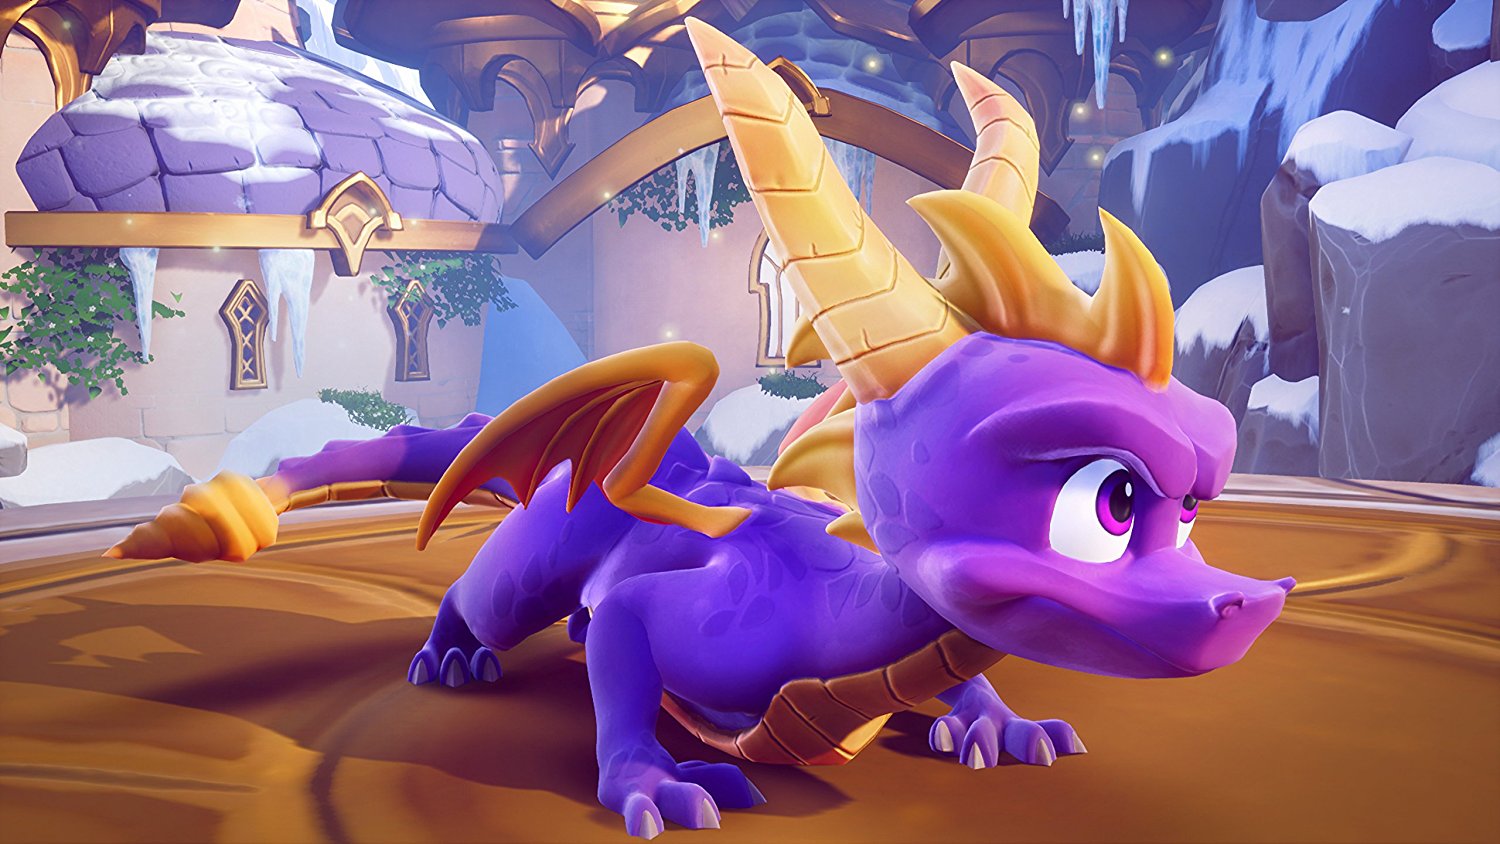 spyro the dragon games online to play